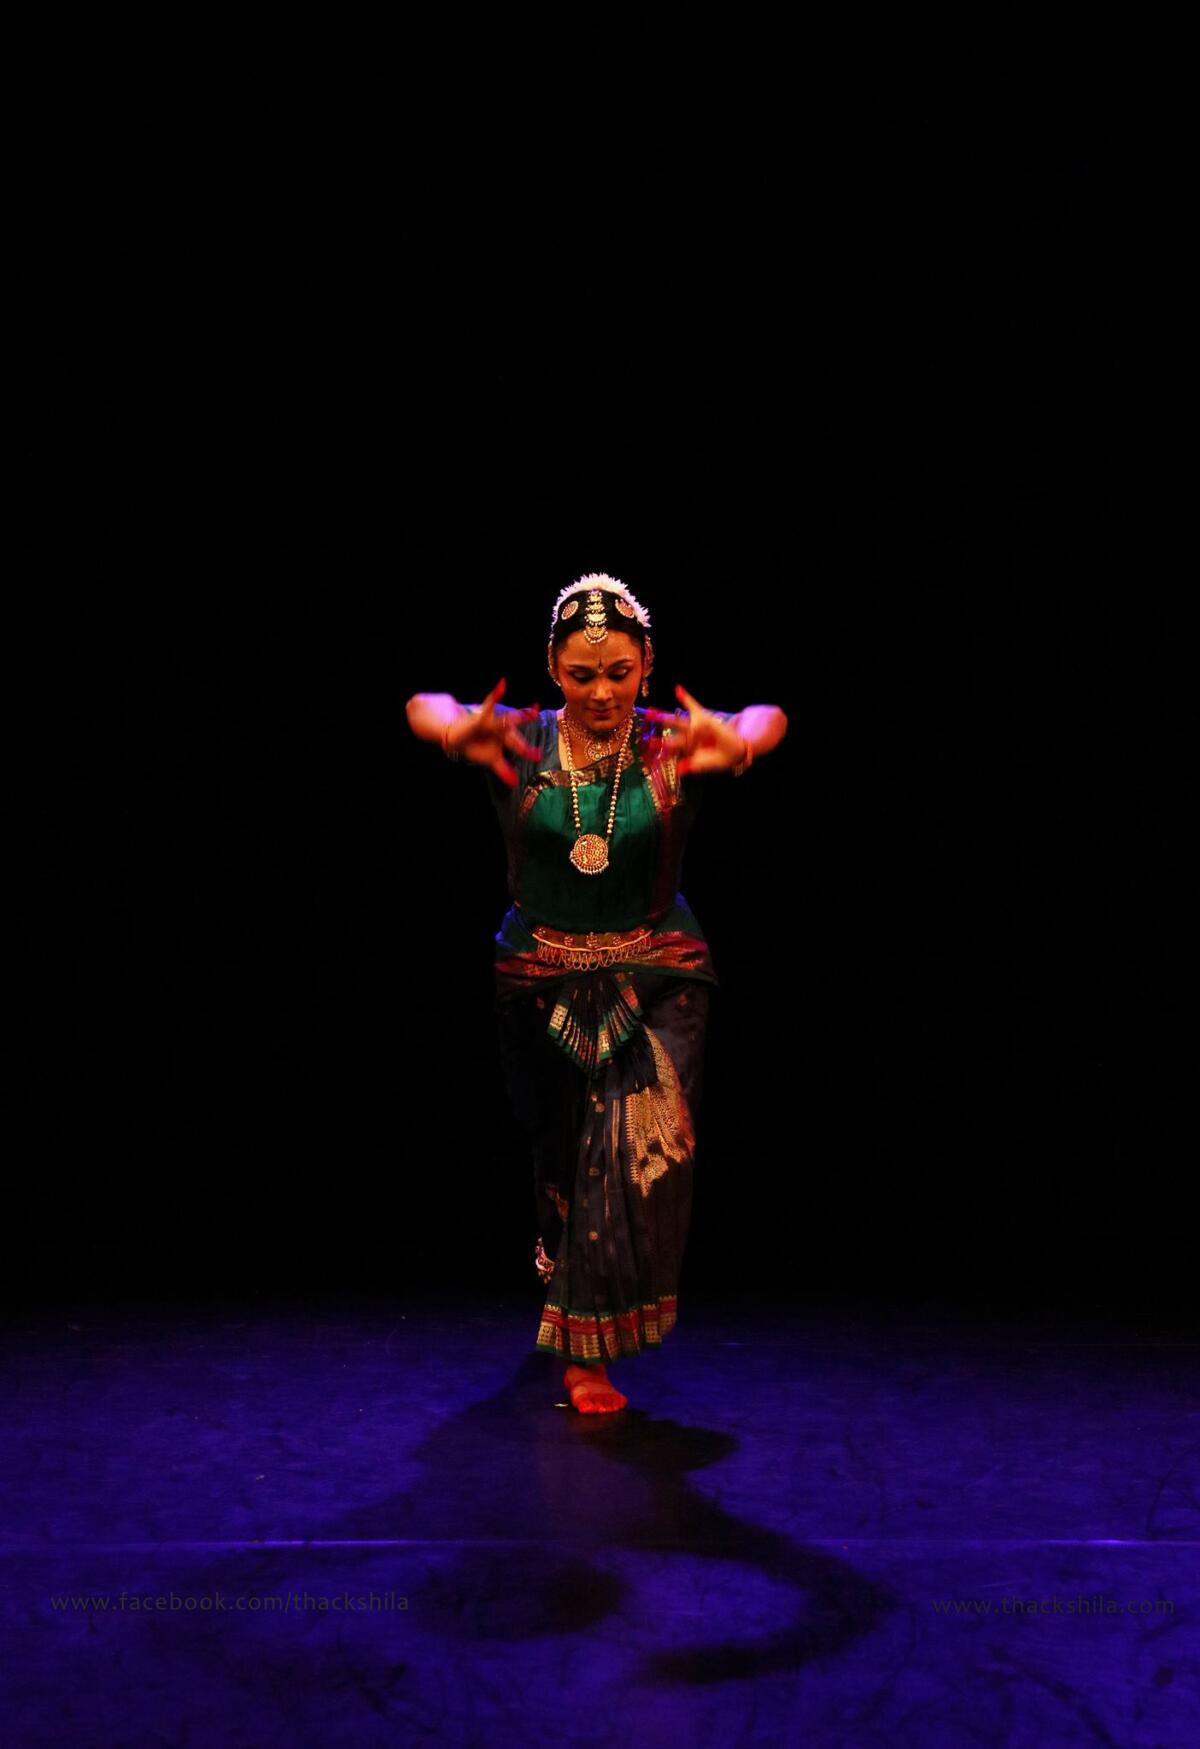 Dancer on a stage